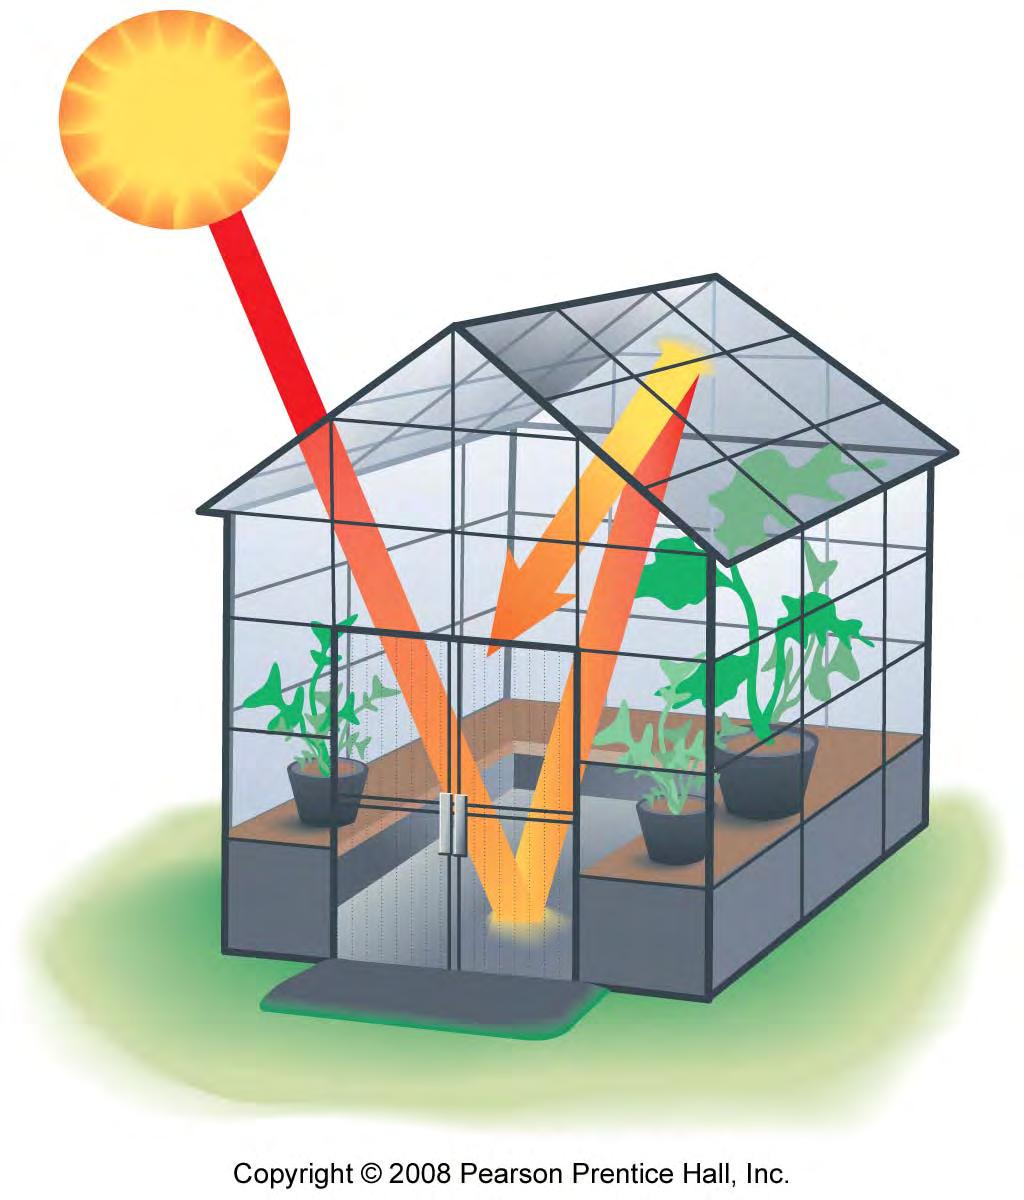 Greenhouse effect Fig. 6.